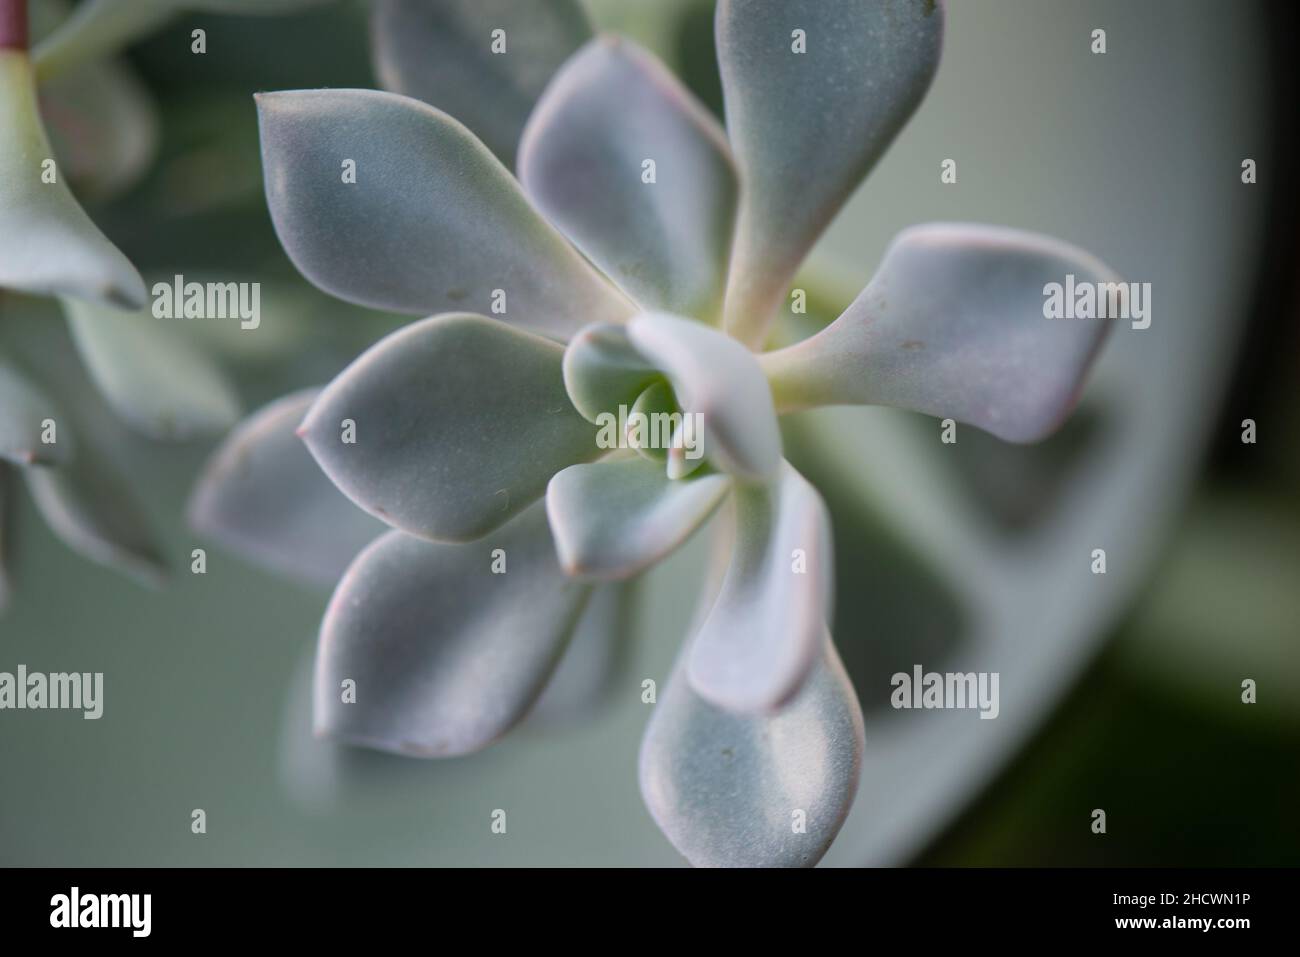 Succulent leaves Stock Photo